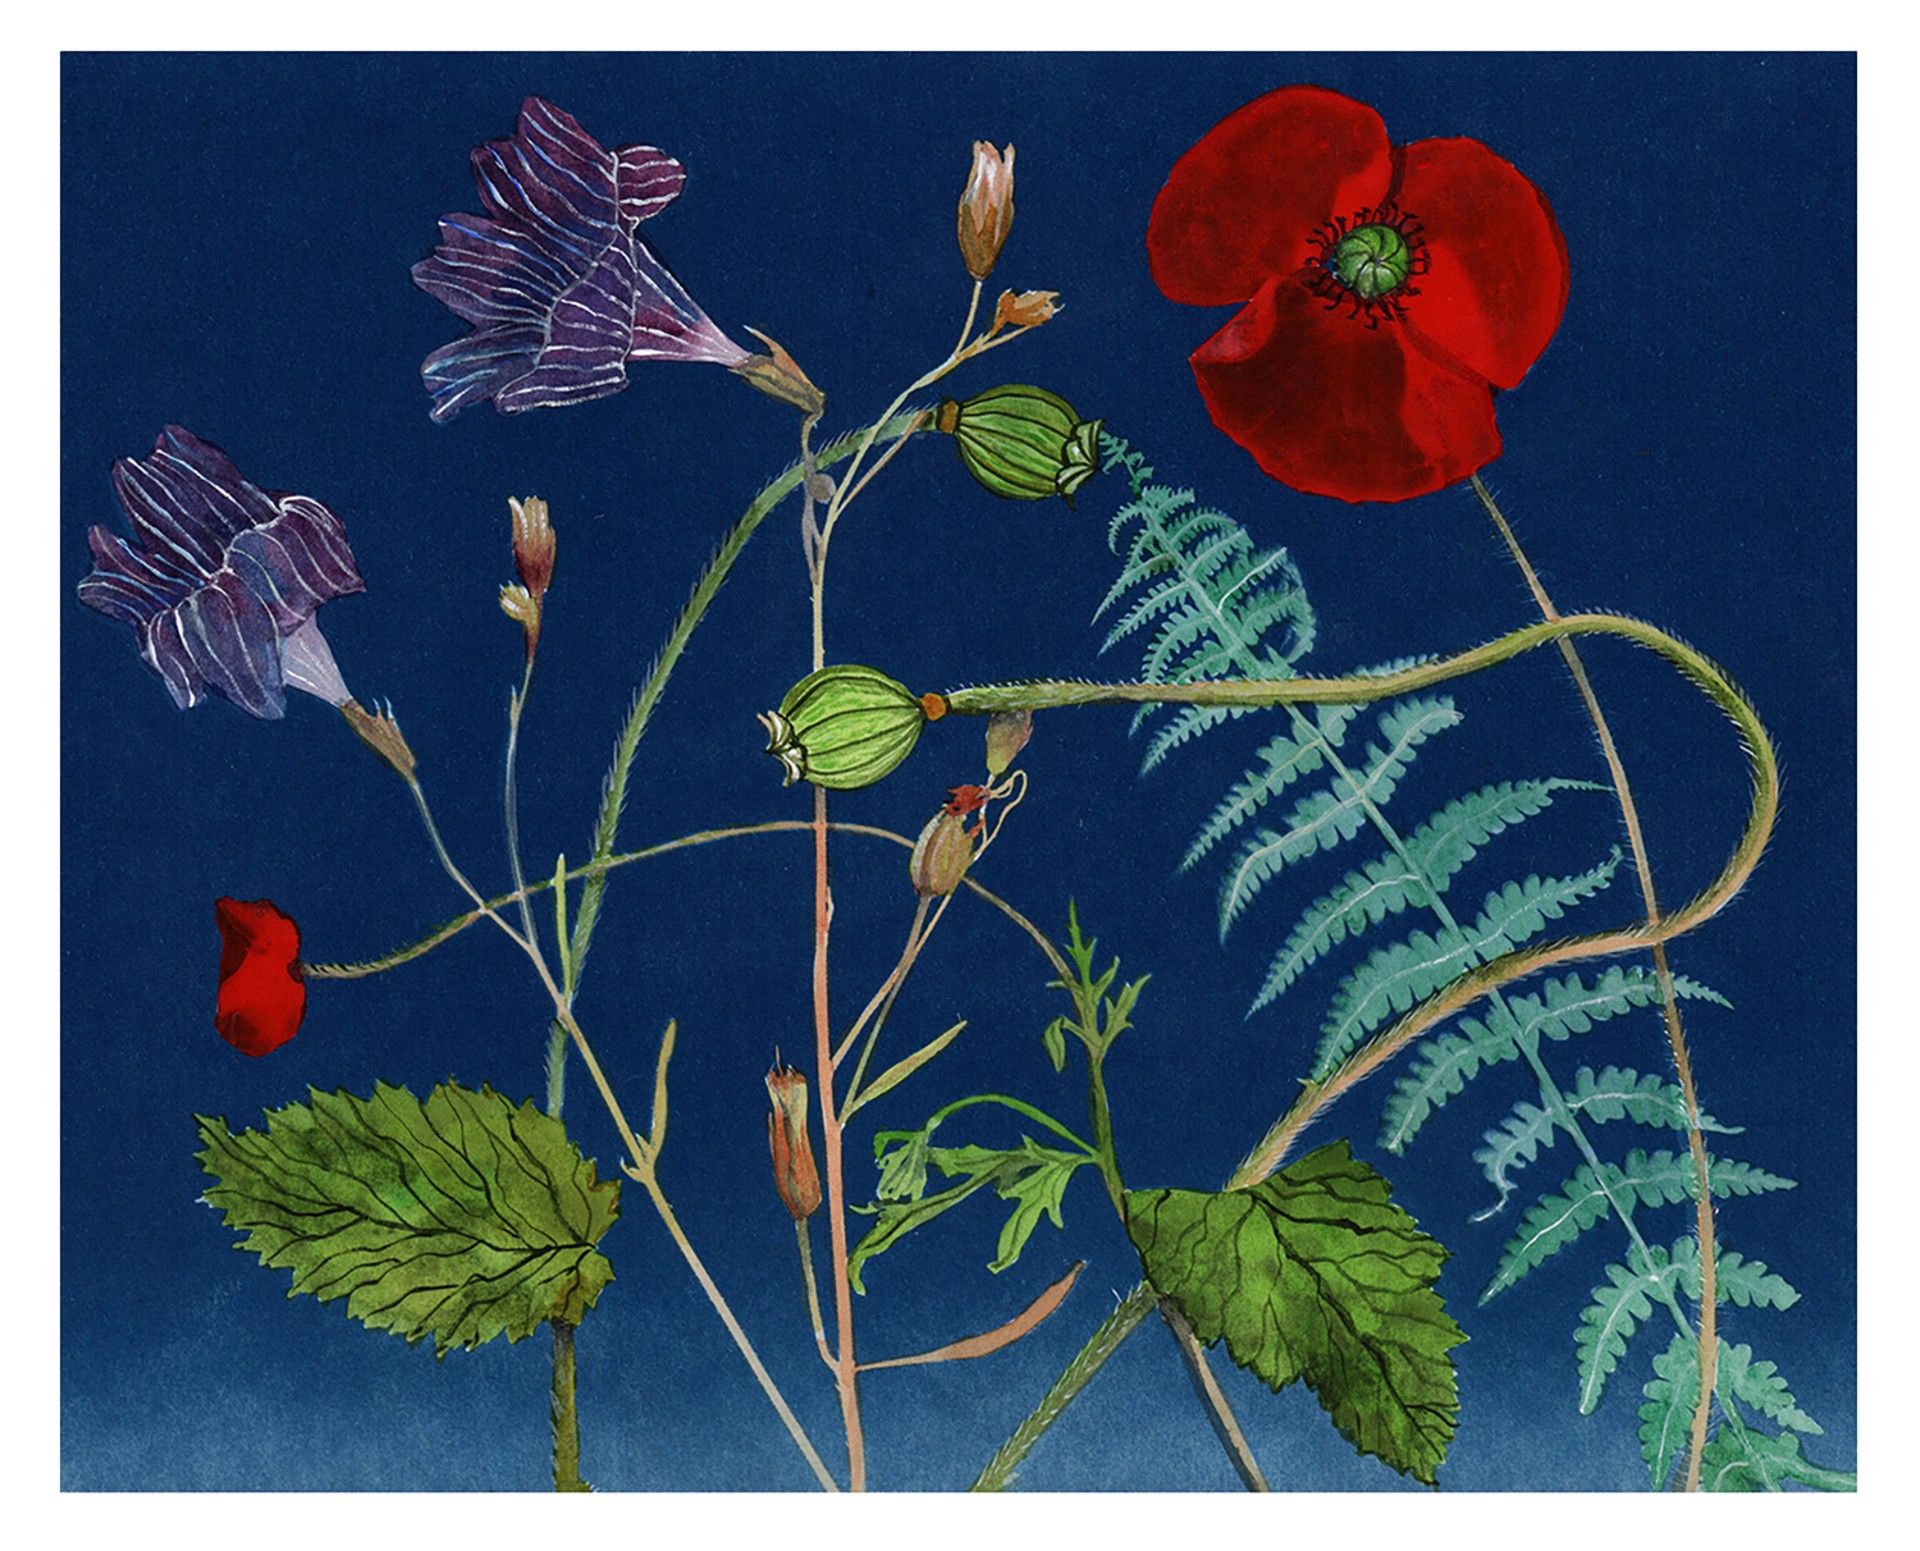 Nocturnal Nature (Poppies, Petunia, Fern) by Julia Whitney Barnes